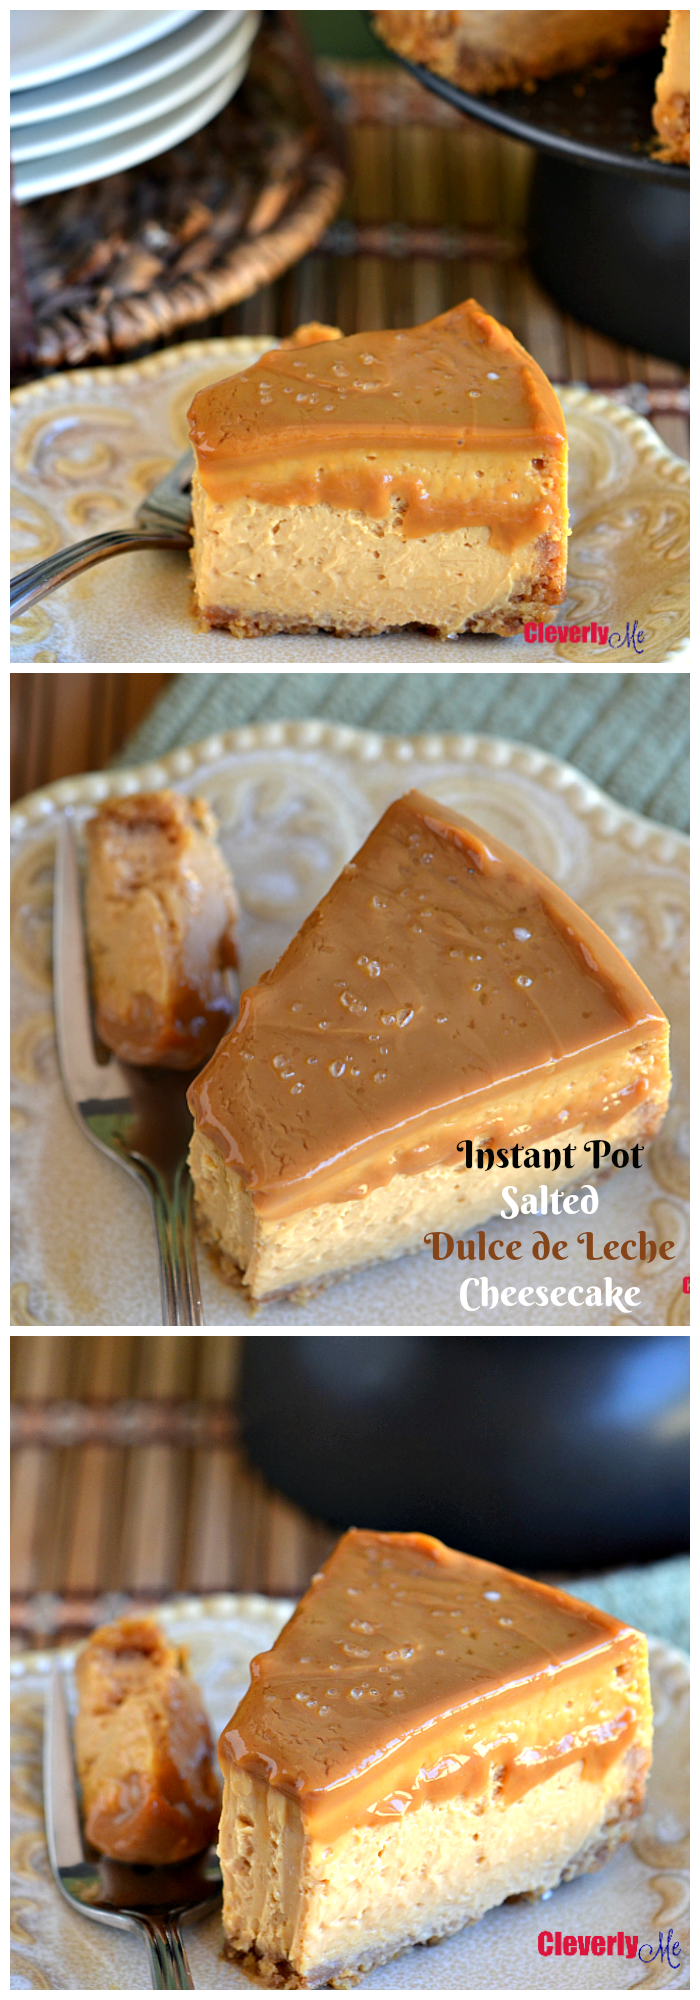 Looking for an easy dessert? This sweet and salty Instant Pot Salted Dulce de Leche Cheesecake Recipe can't be beaten! Your friends and family will be totally impressed, guaranteed. Get the recipe at CleverlyMe.com